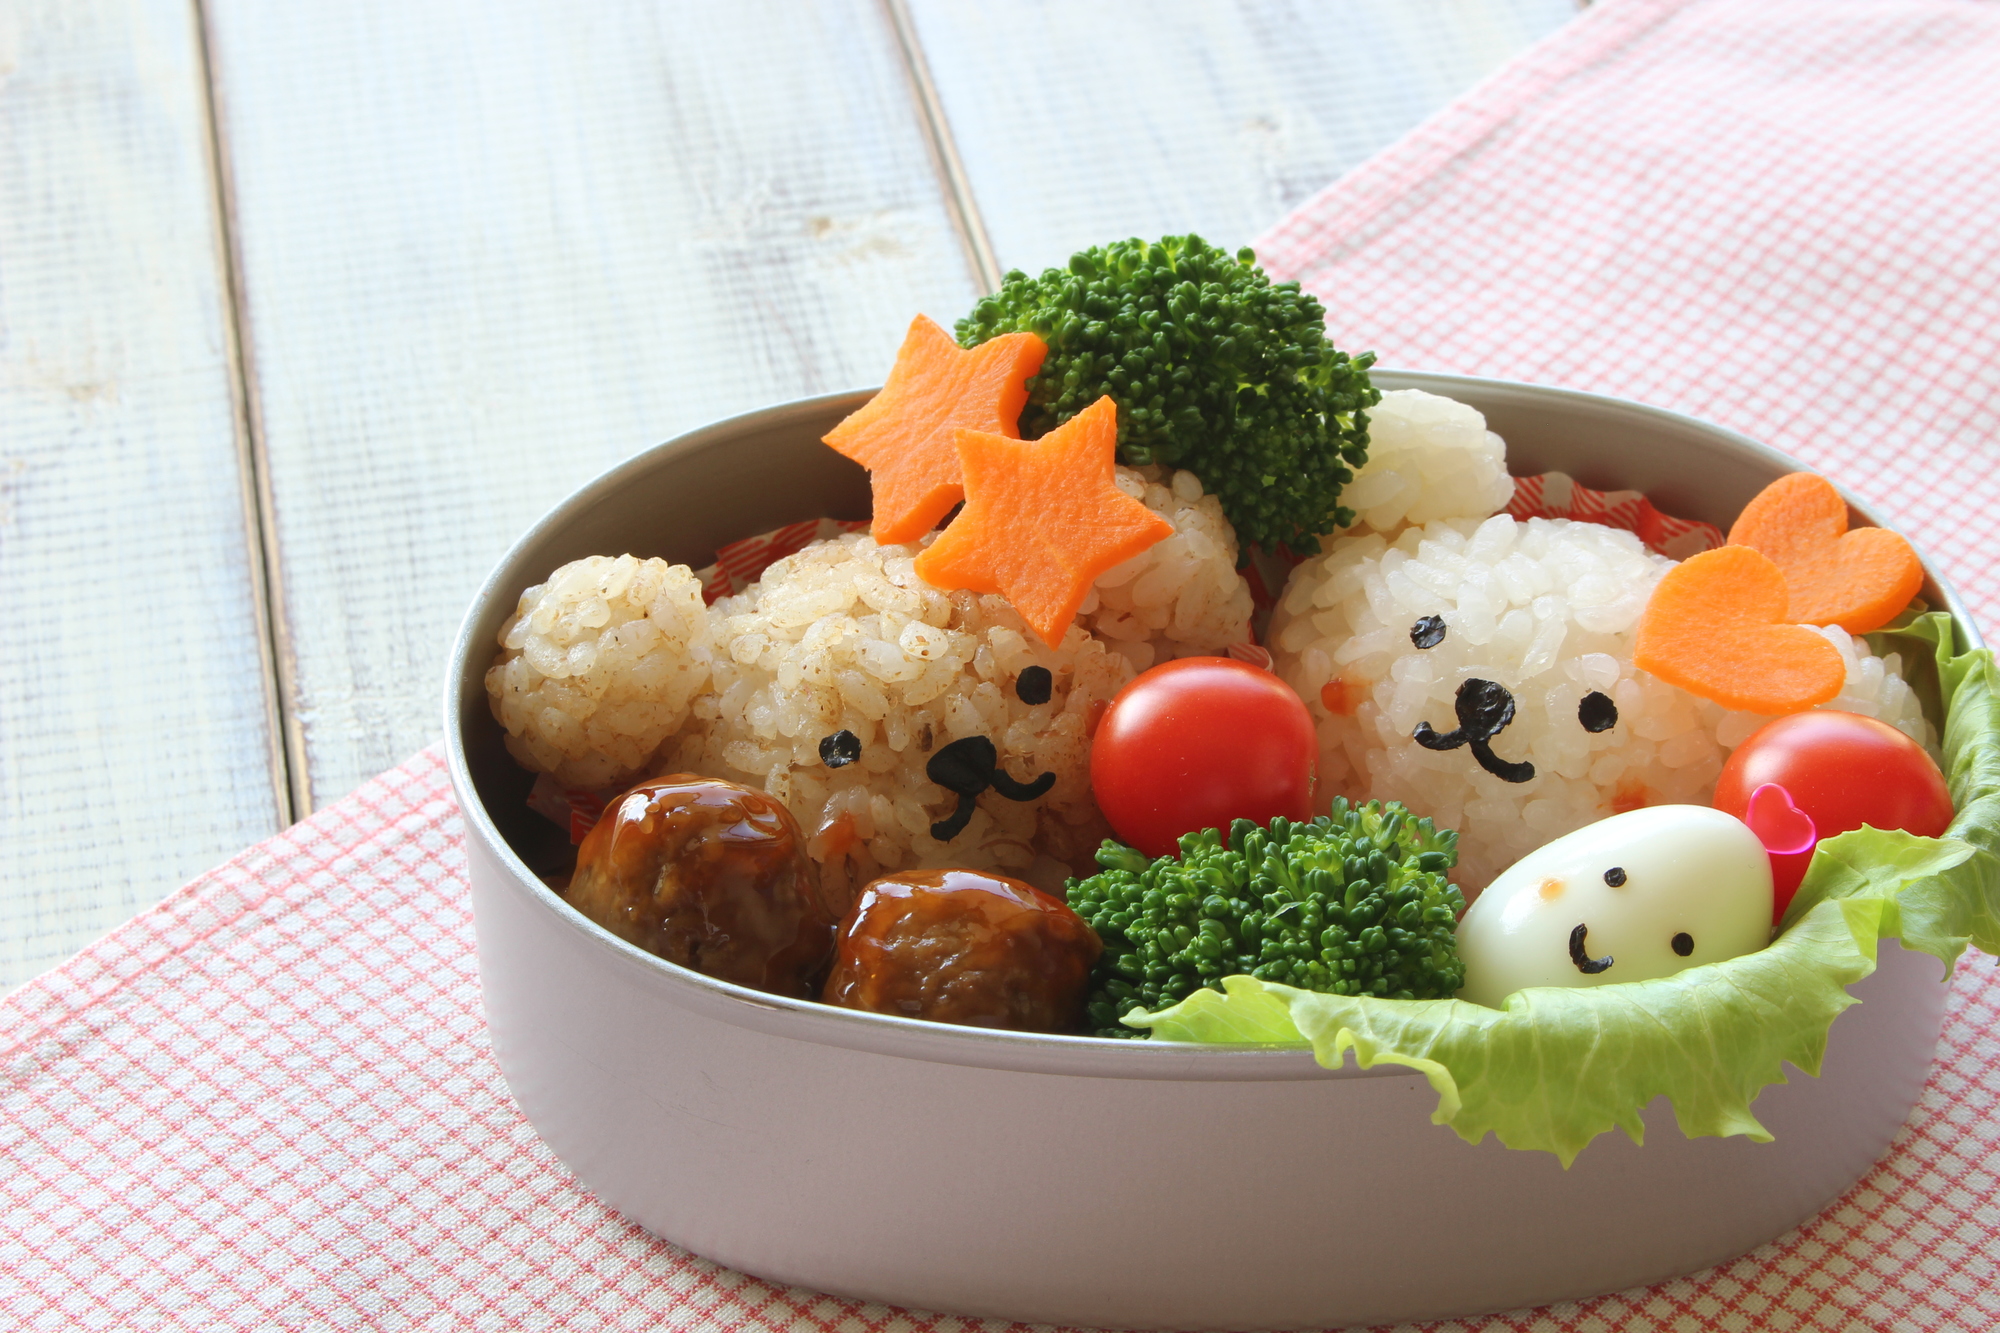 Bento, a look inside the Japanese lunchbox